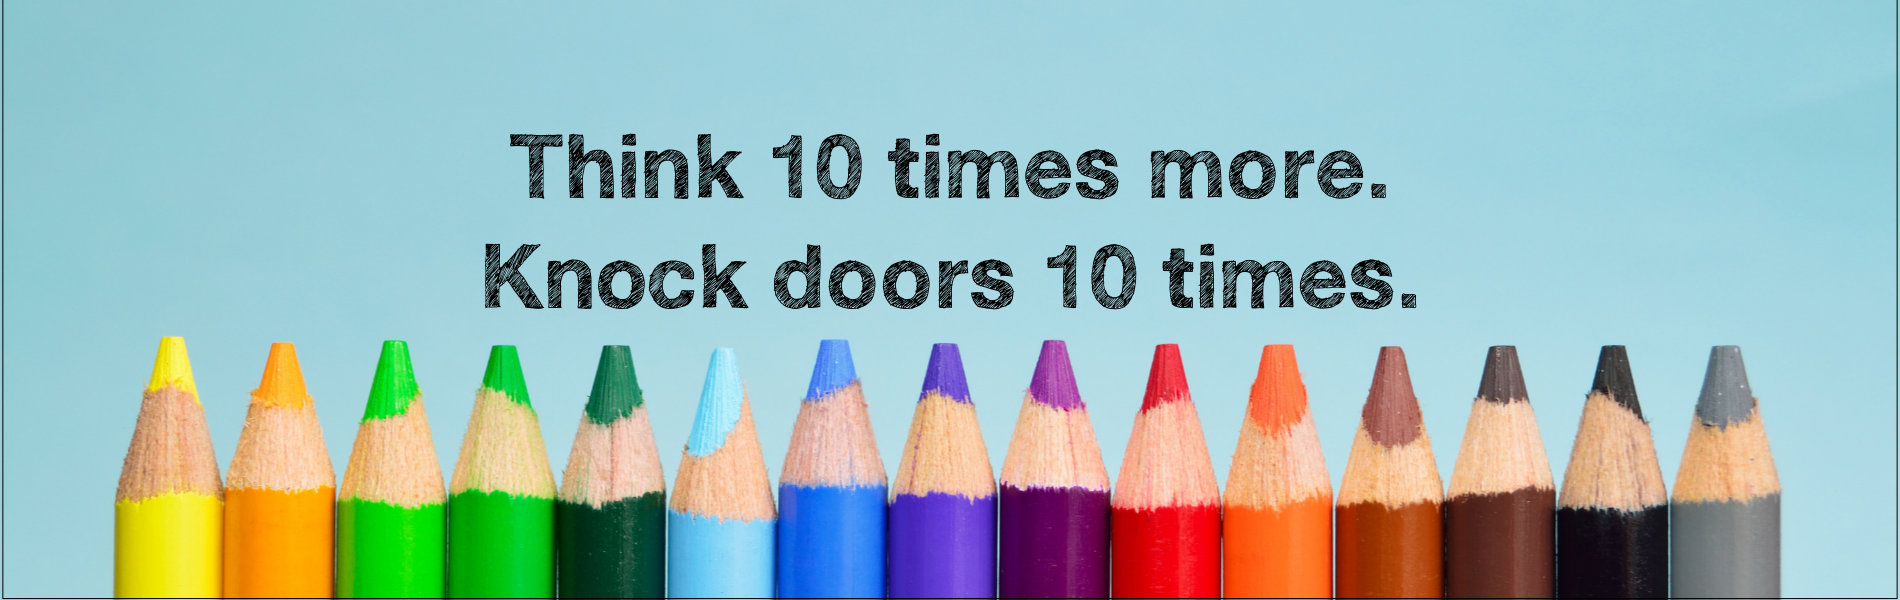 Think 10 times more. Knock doors 10 times.